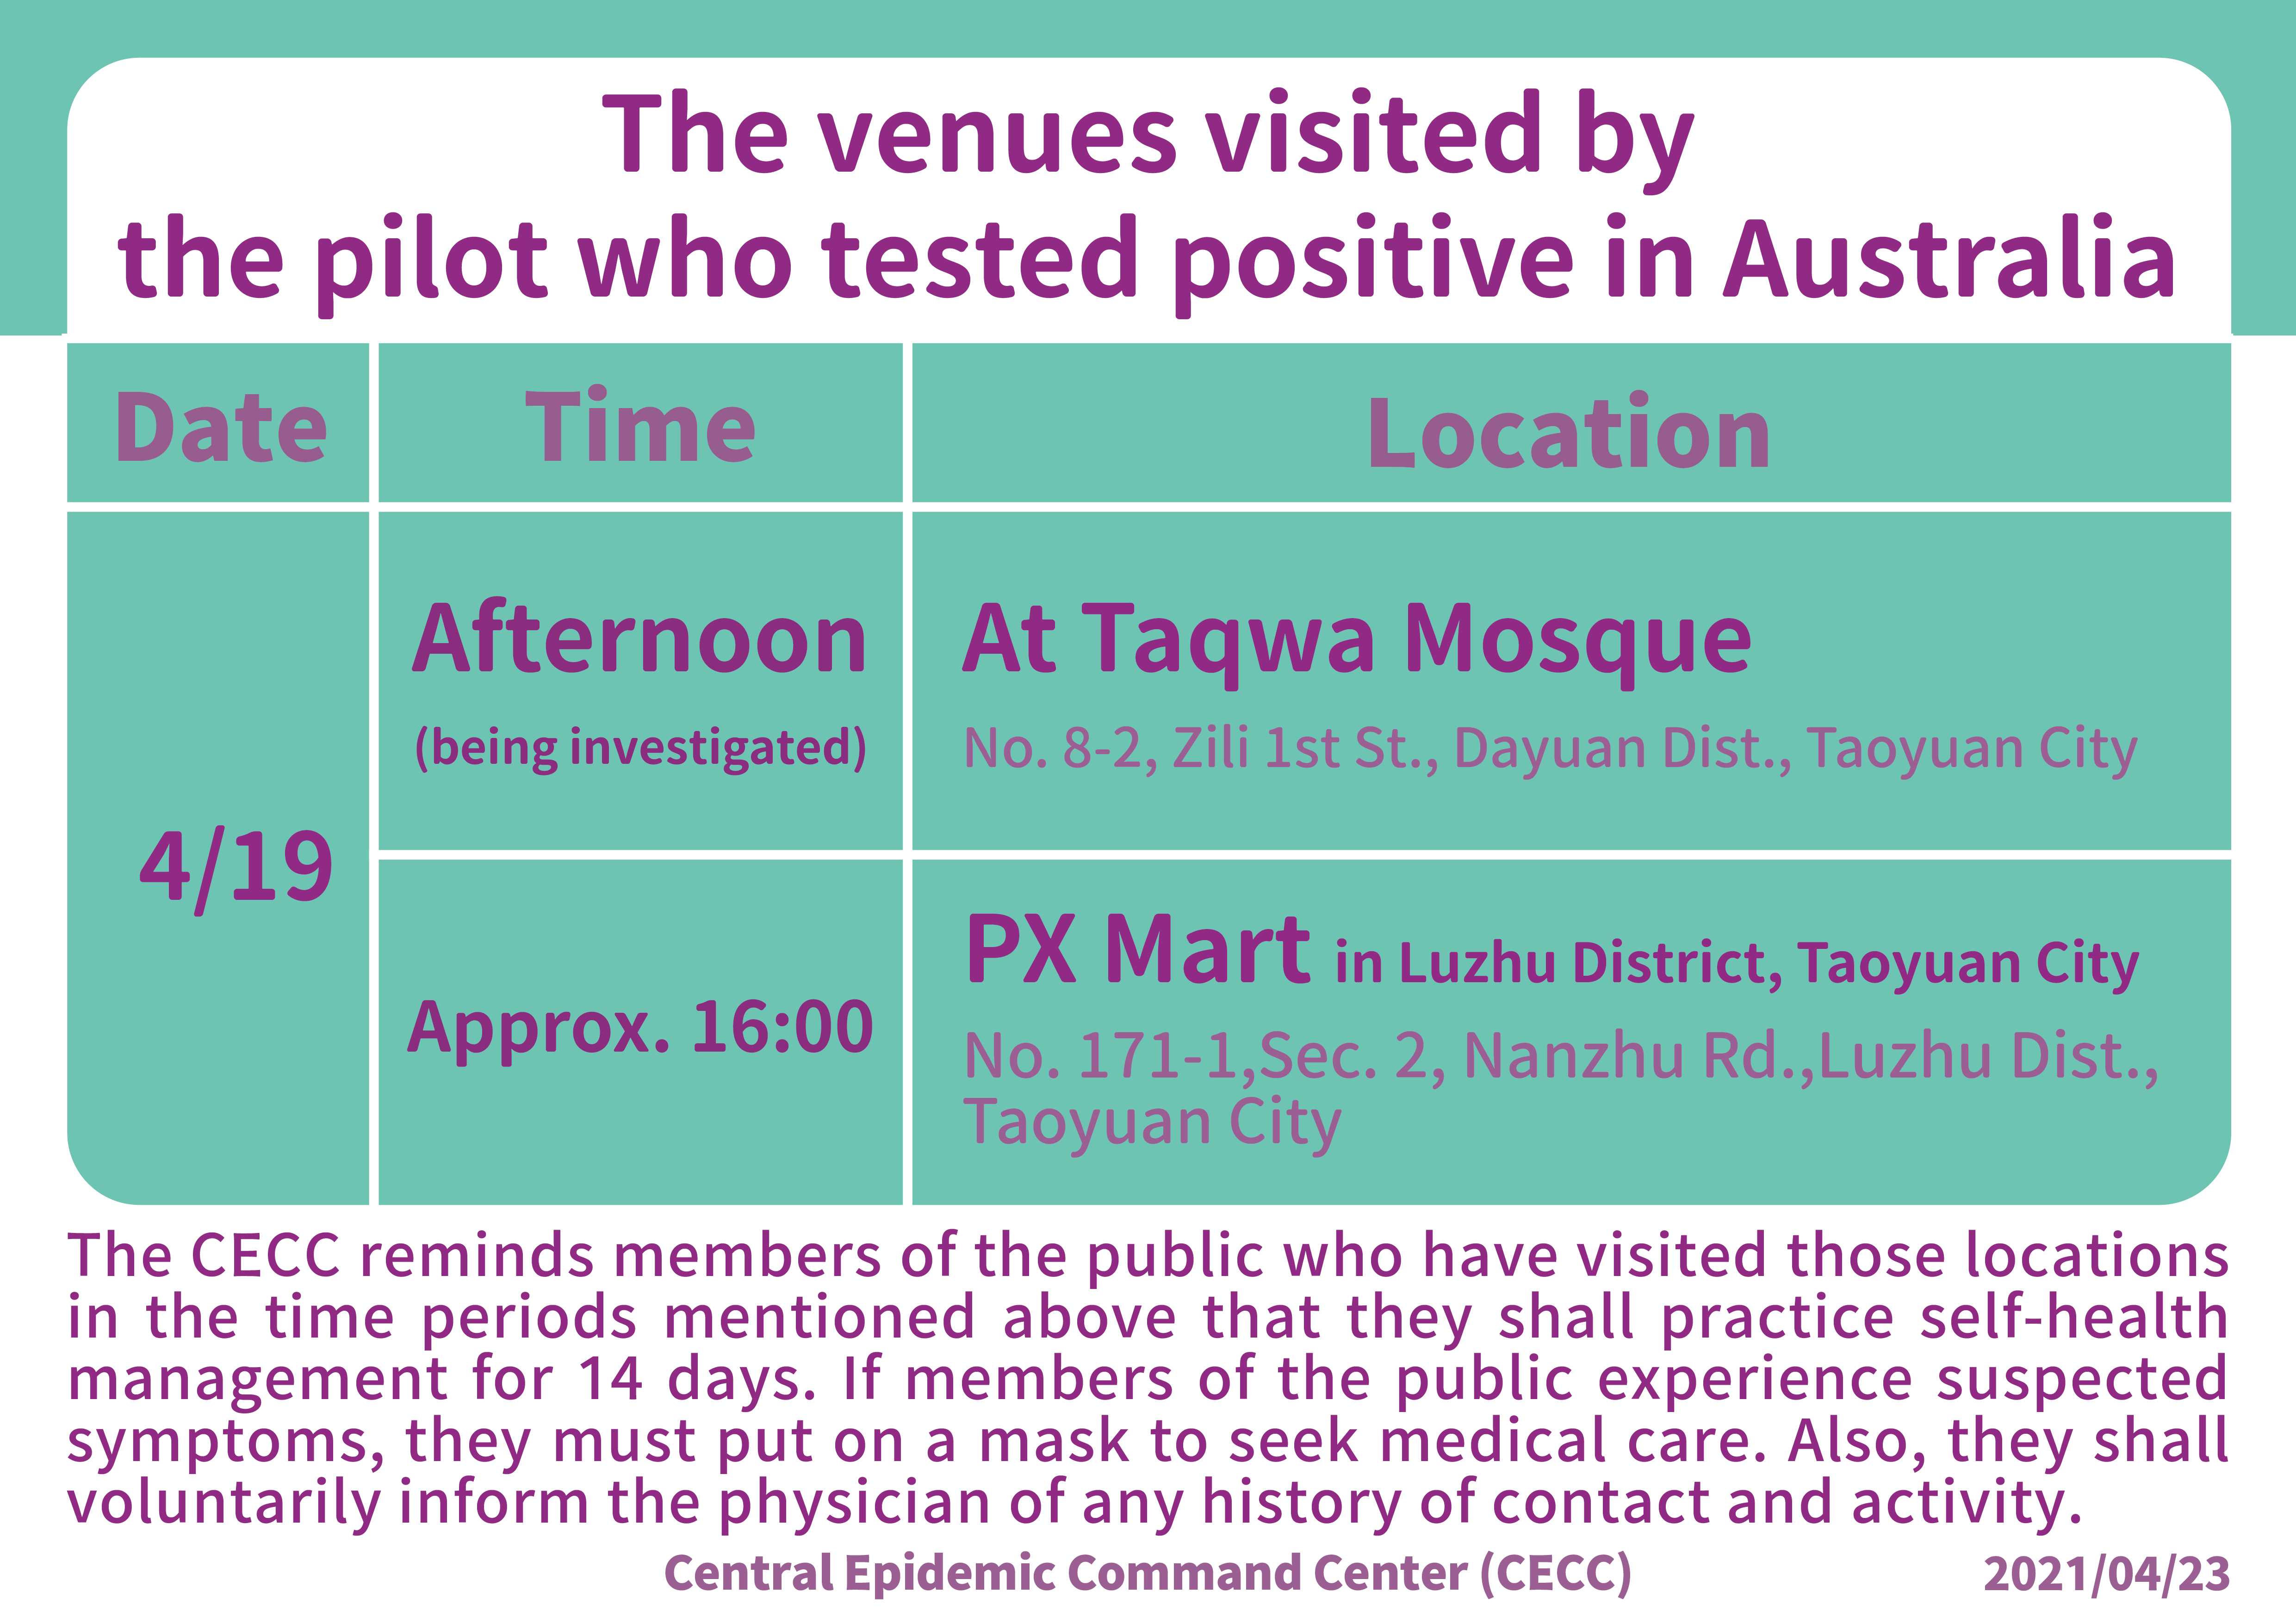 The venues visited by the pilot who tested positive in Australia